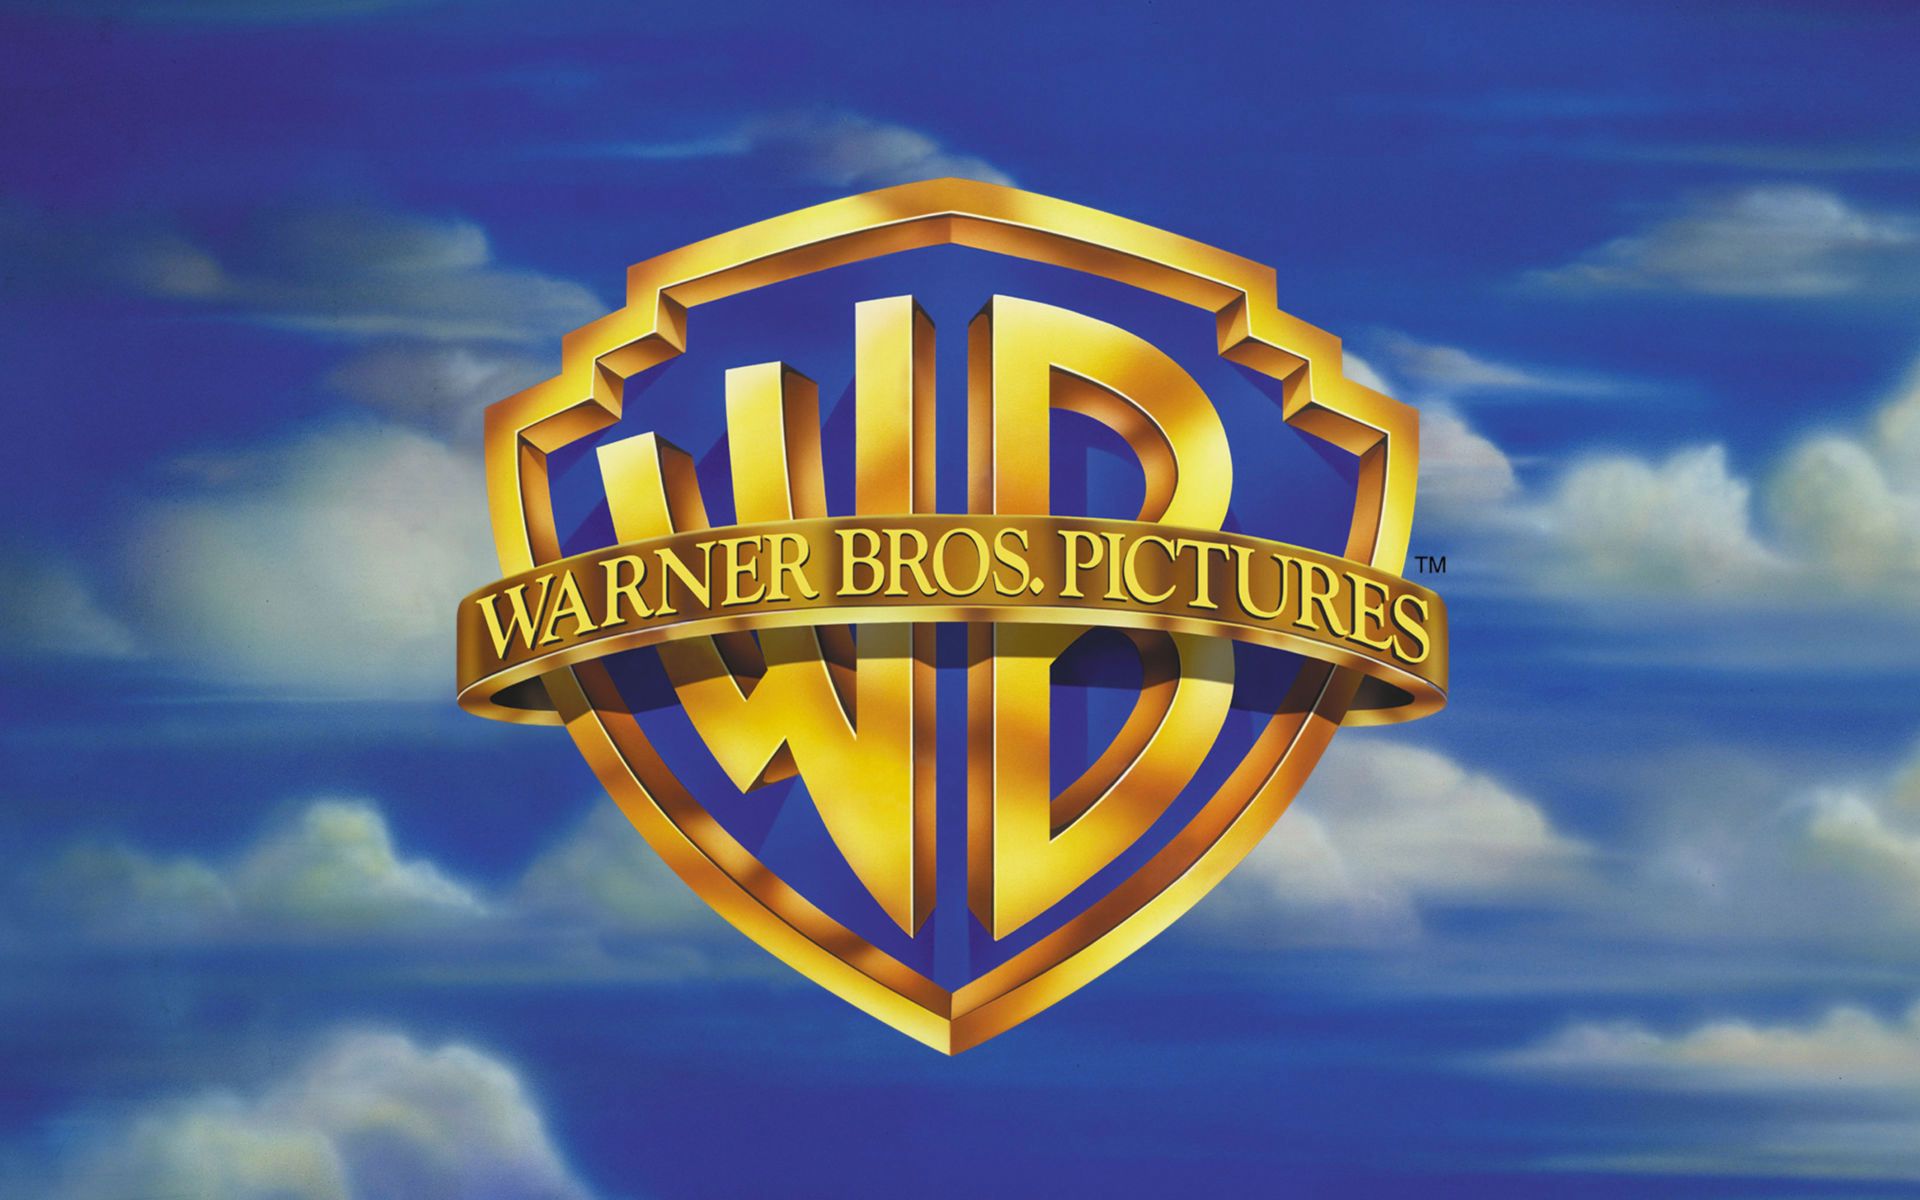 Studios divided over release strategy, as Cineworld and Warner Bros